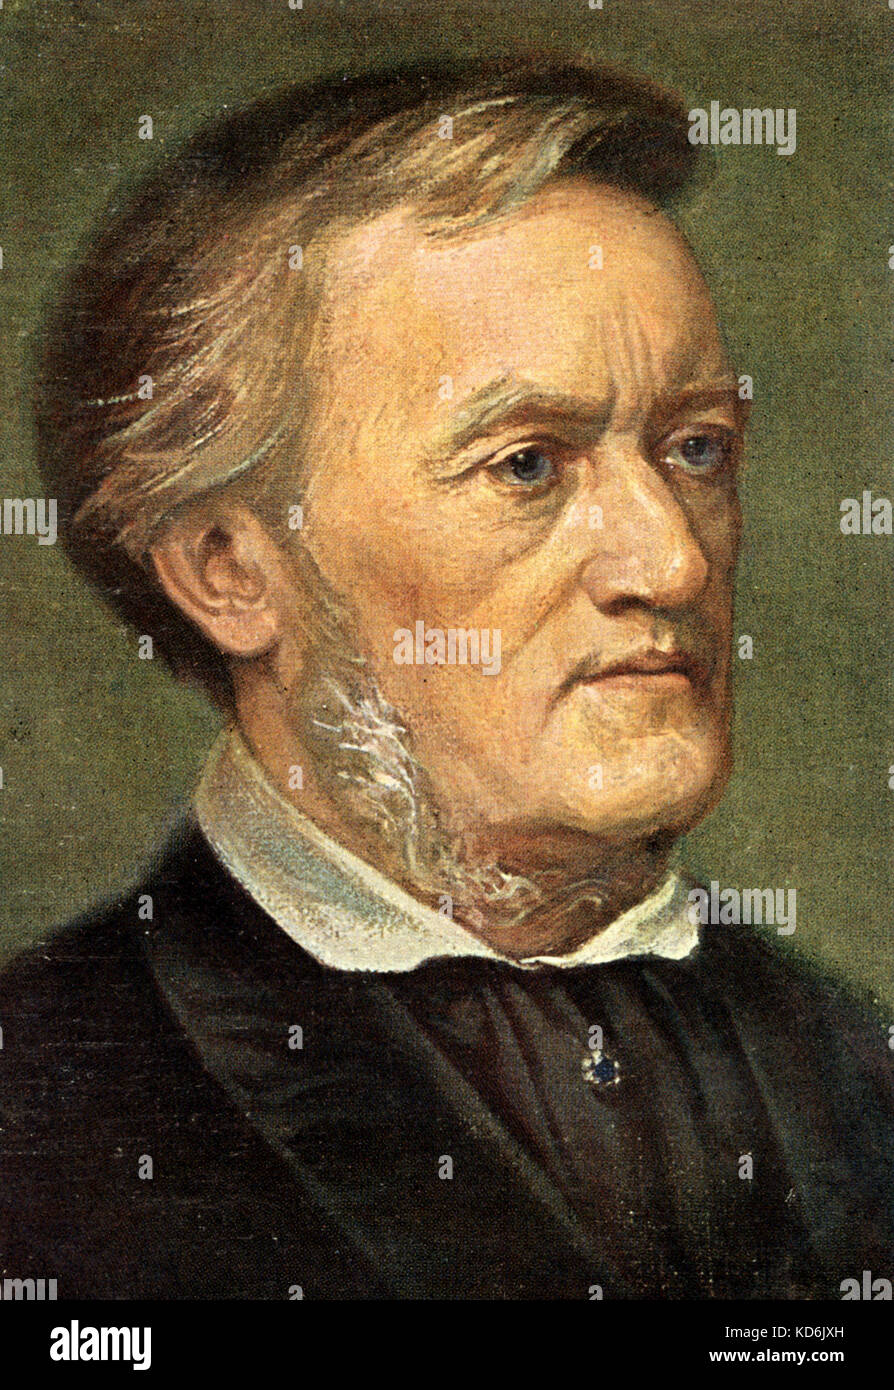 Richard Wagner by Max Sinz. German composer & author, 1813-1883. Stock Photo